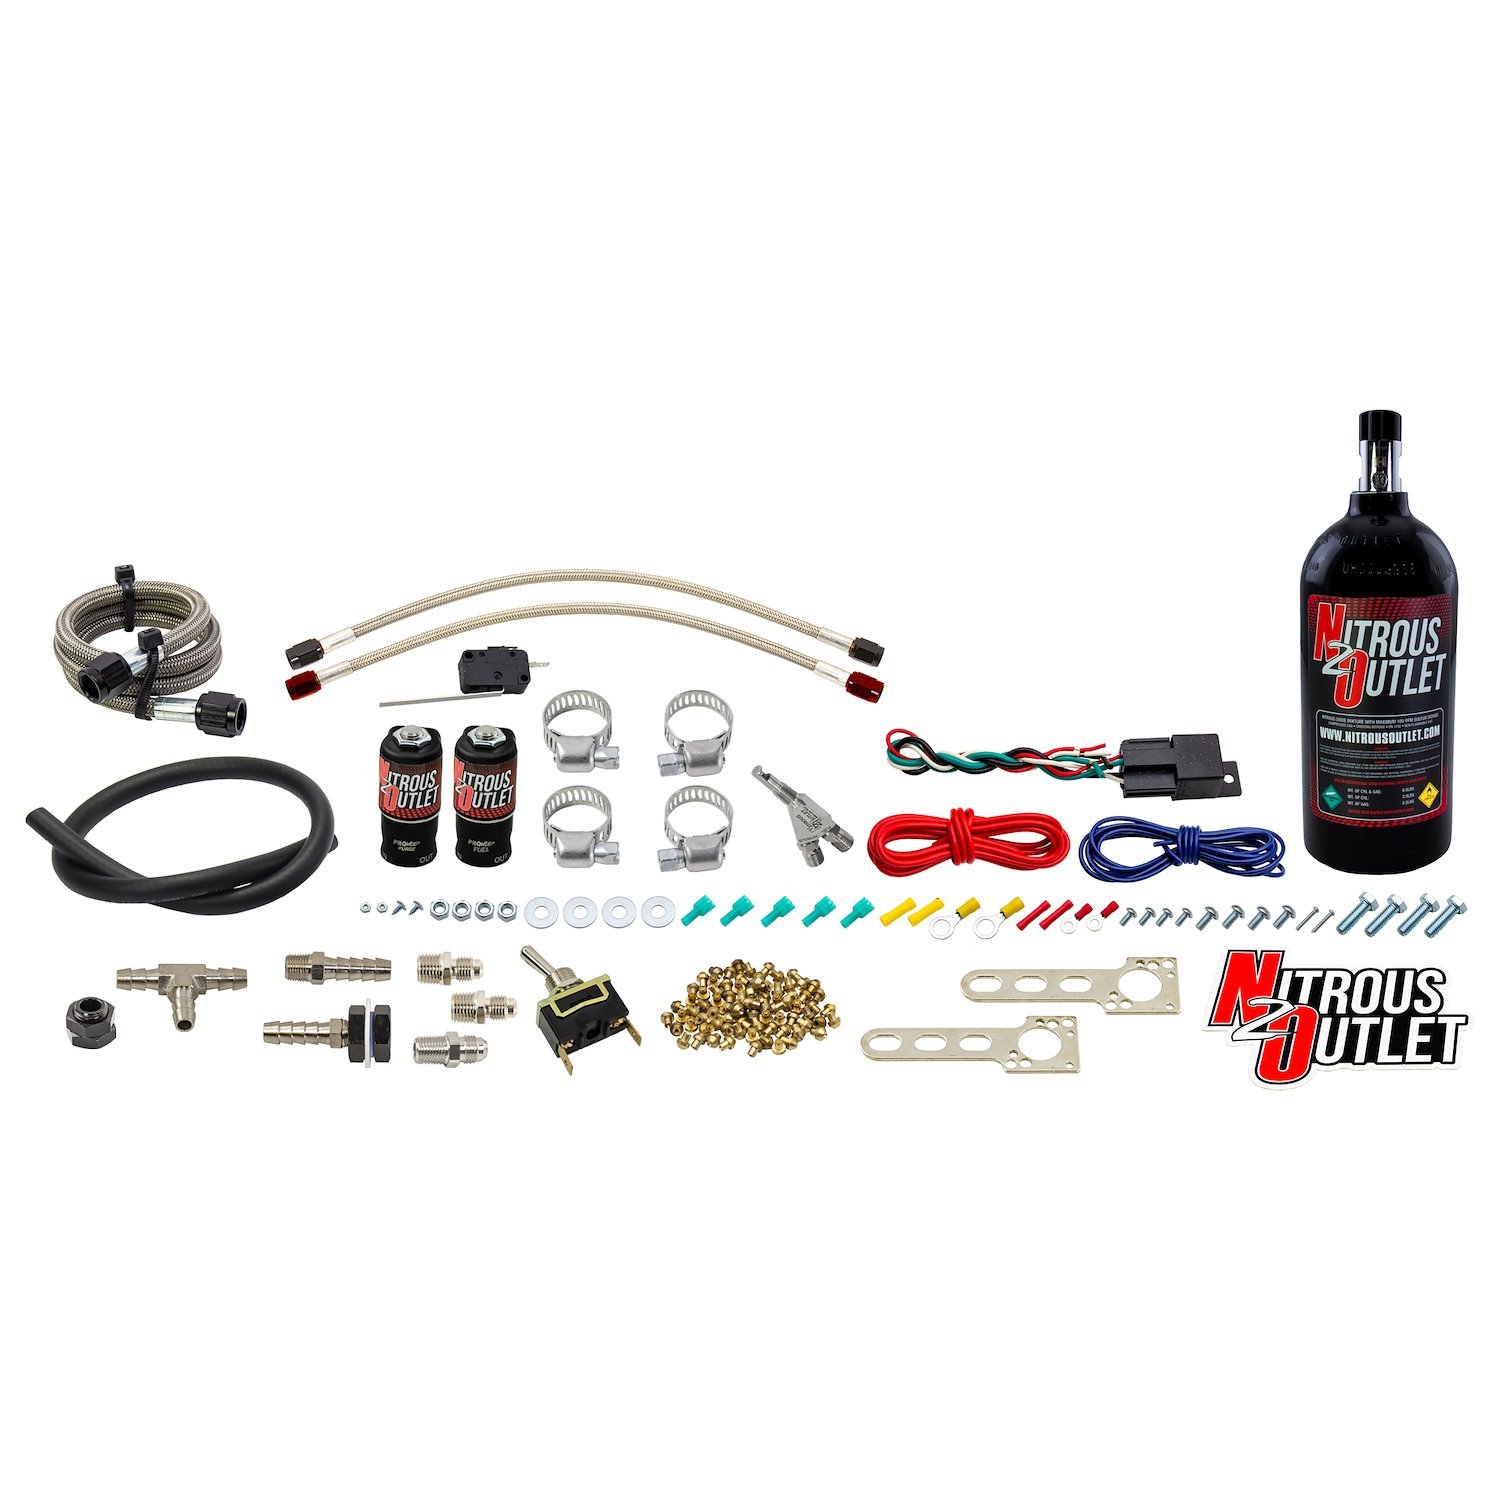 50-10012-2.5 Powersports Single-Cyl Wet Nozzle System, Stainless 90-Degree Nozzle, Gas, 6 psi, 1015202530 HP, 2.5LB Bottle